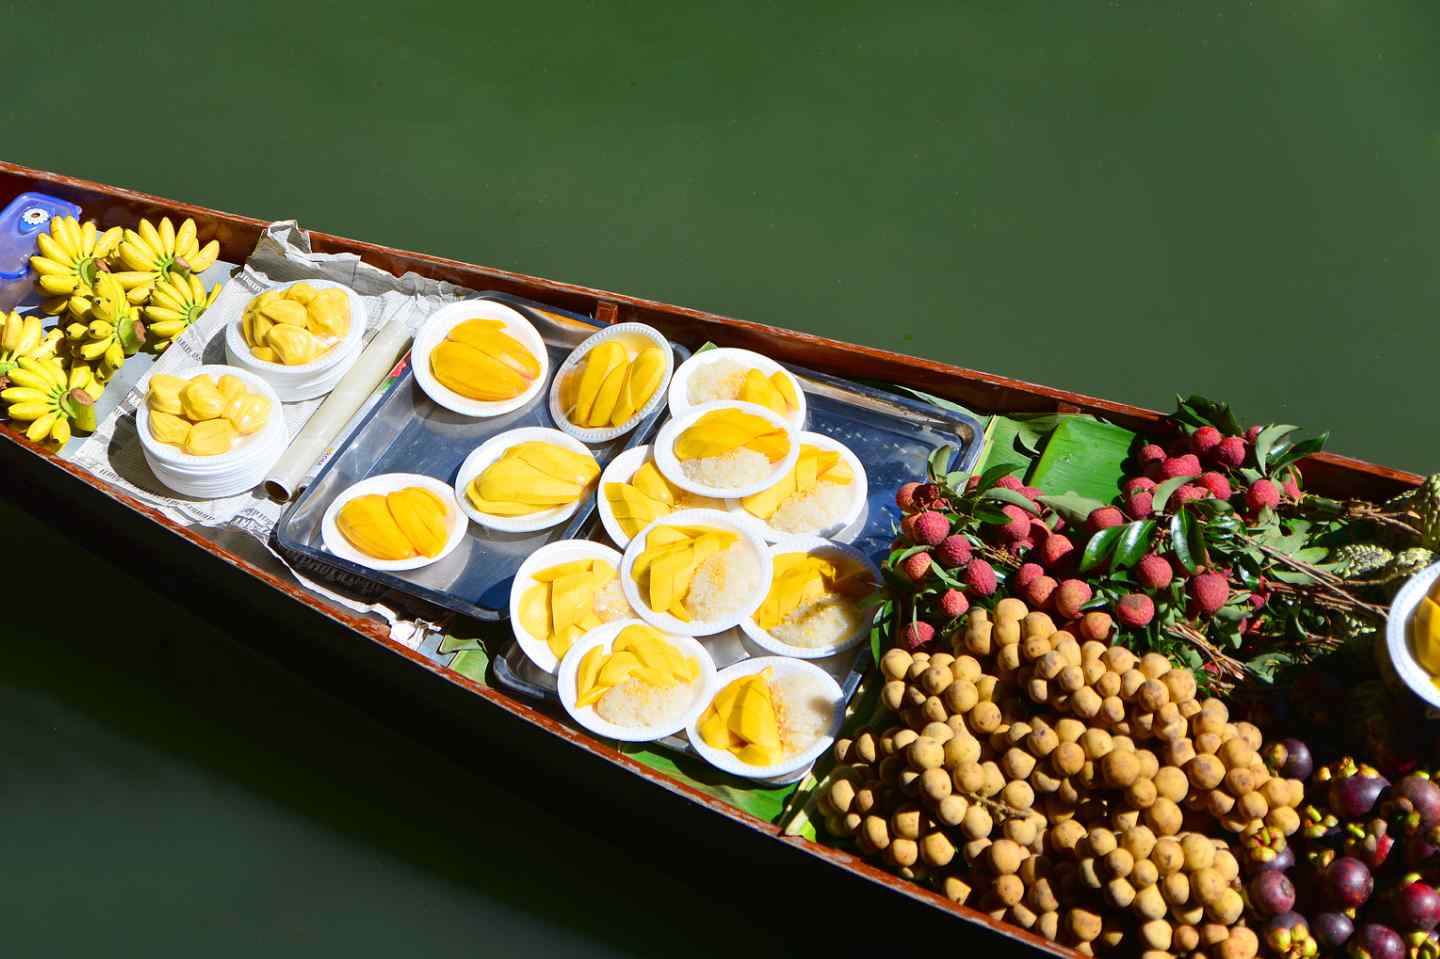 Vietnamese fruits are sold in small boat